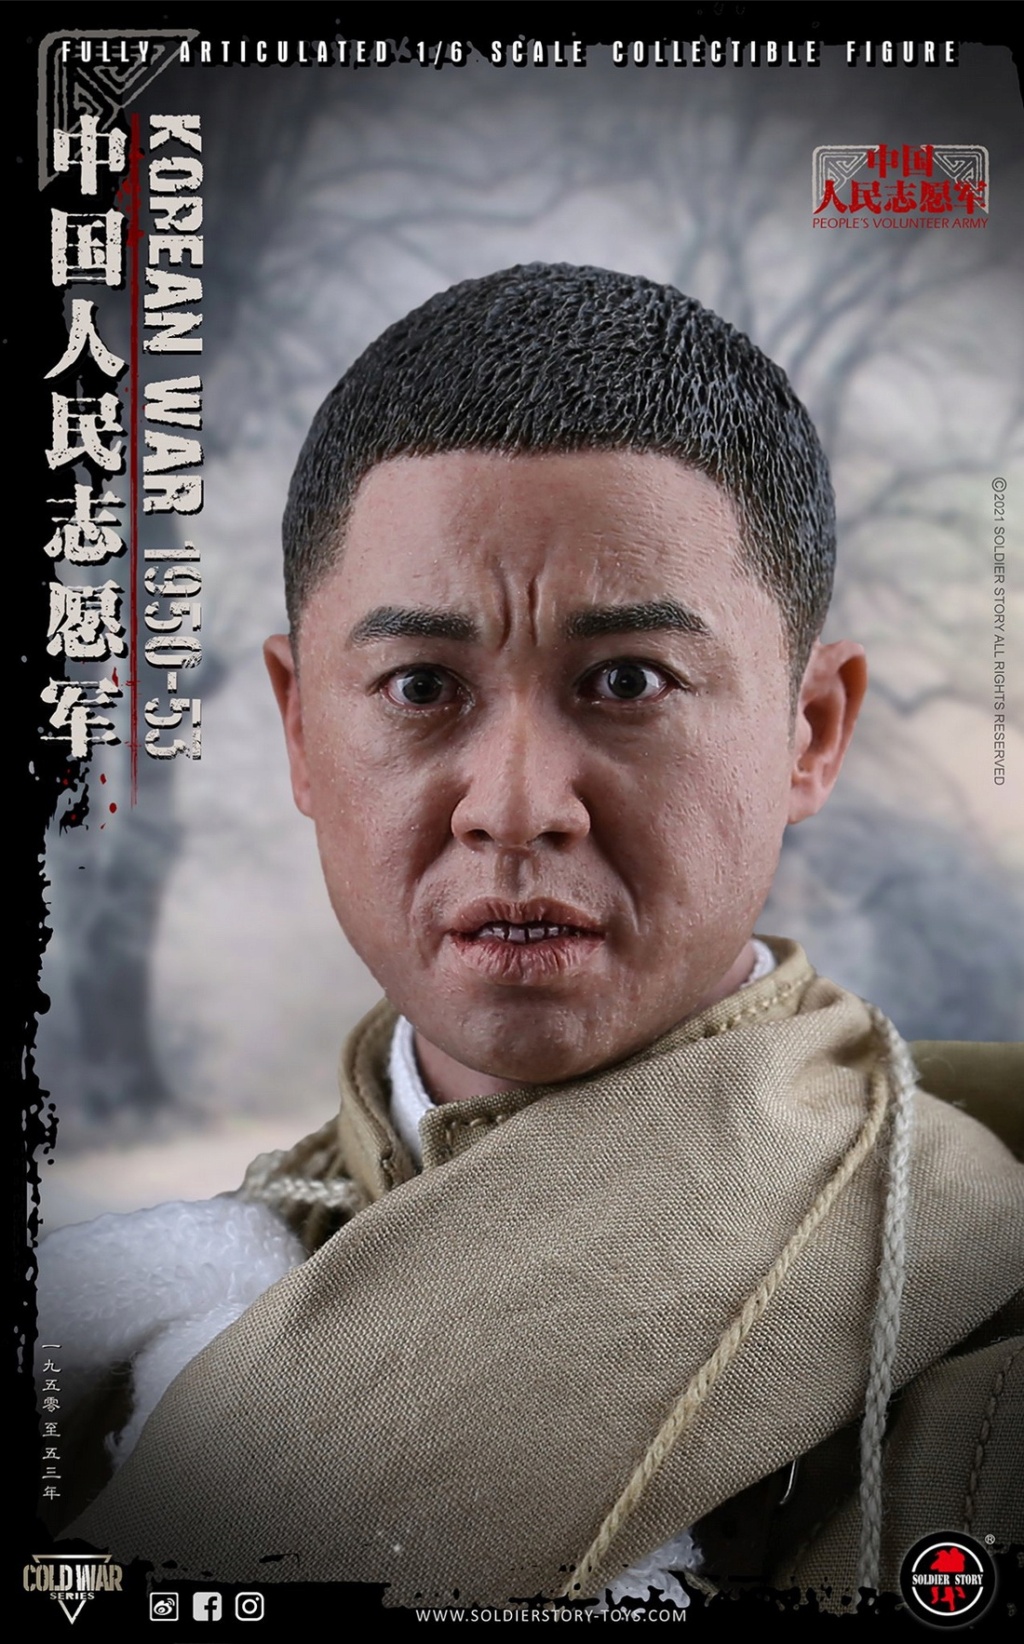 NEW PRODUCT: SOLDIER STORY: 1/6 Chinese People’s Volunteers 1950-53 Collectible Action Figure (#SS-124) 9d465210